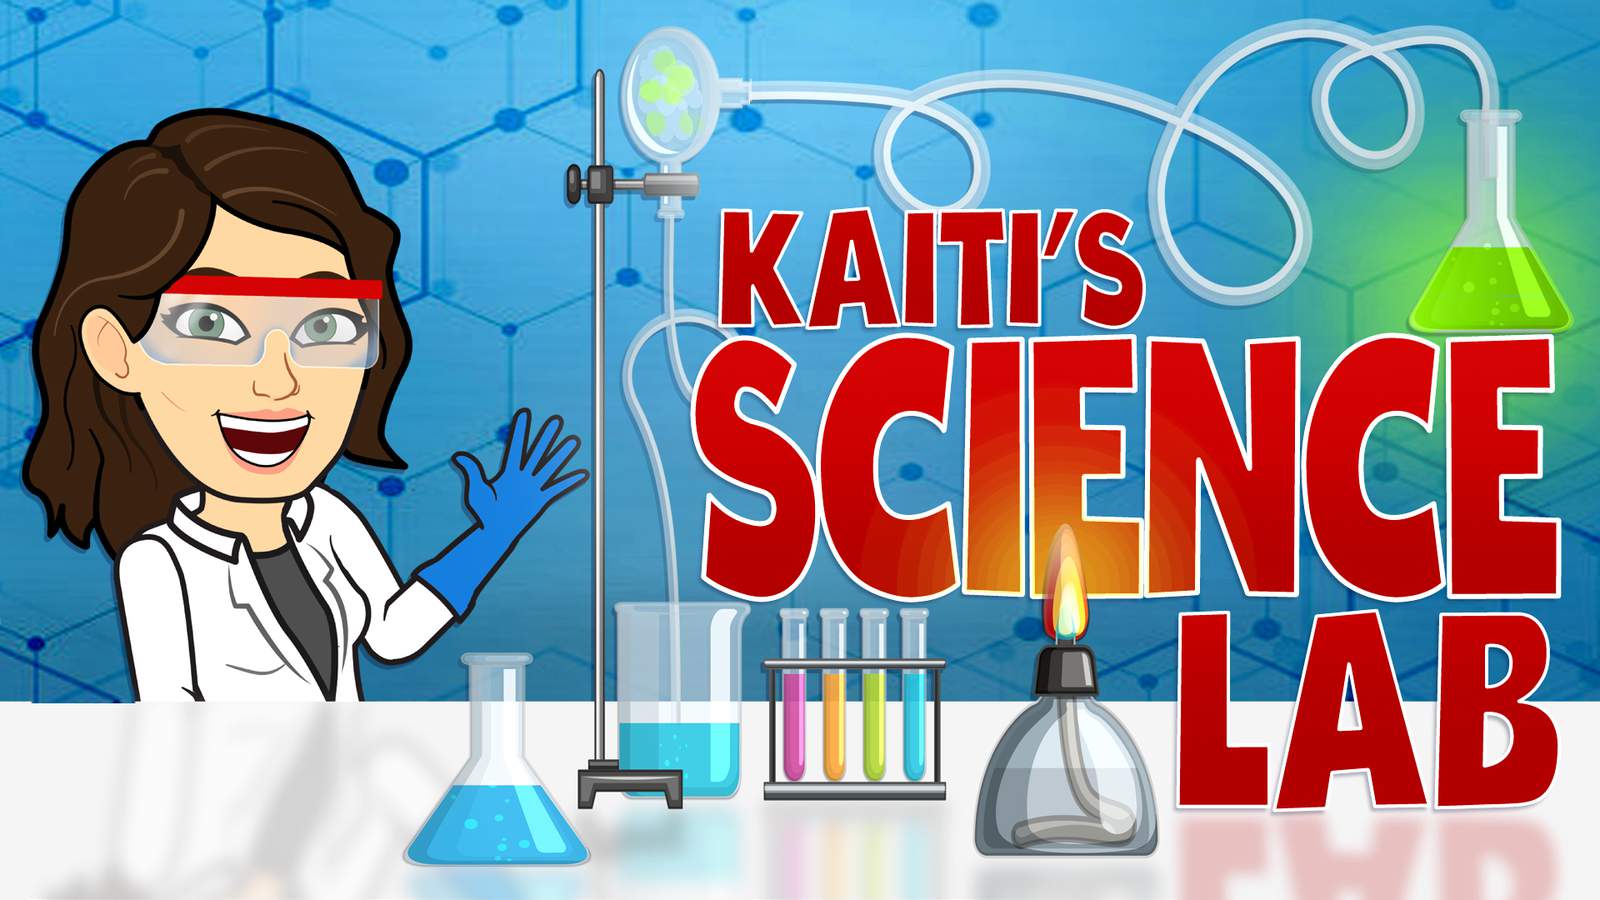 Try Kaiti’s Science Lab experiments at home, send video and see yourself on GMSA at 9 a.m.